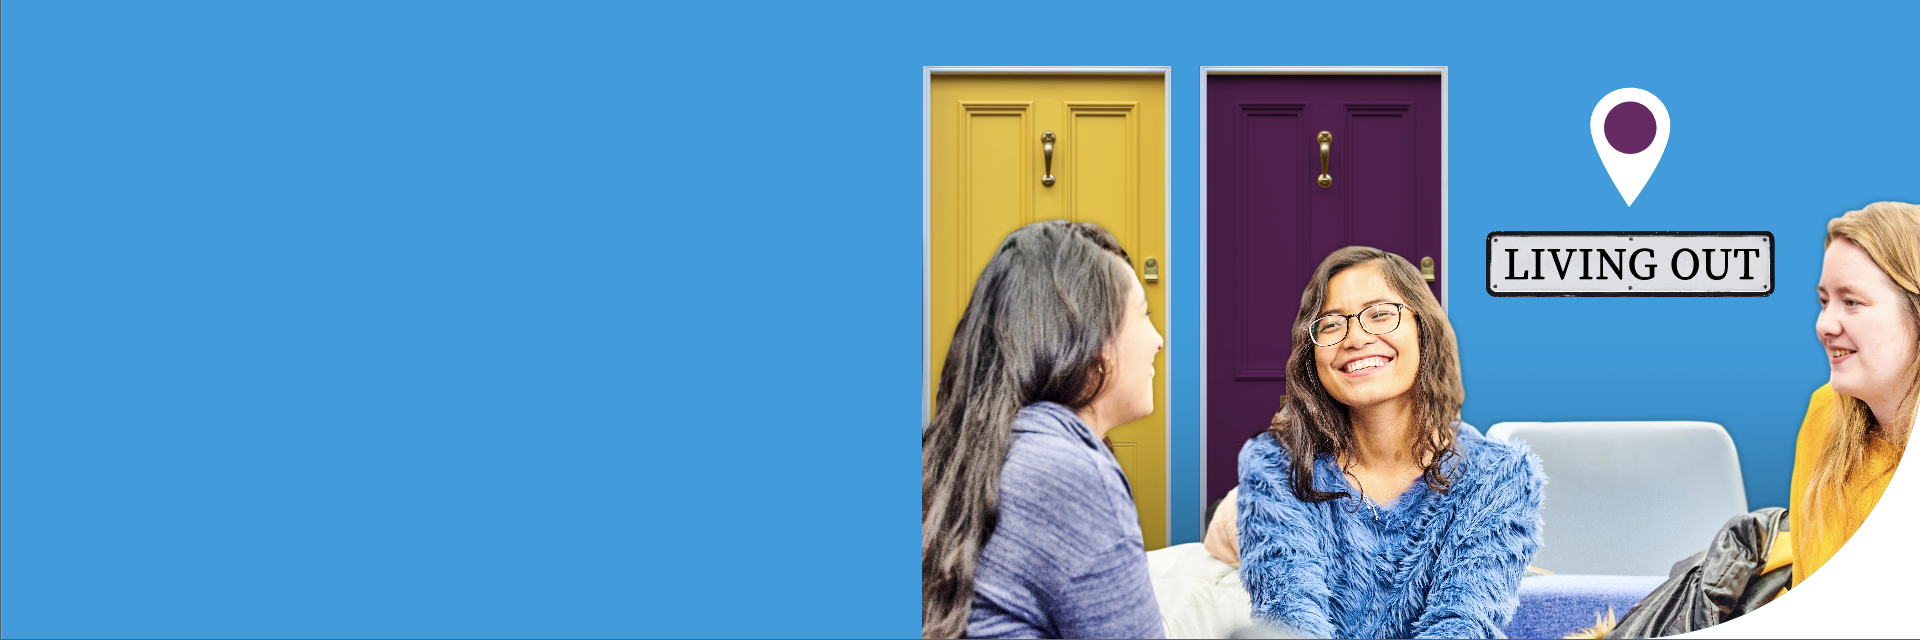 Banner for the Housing Hub, with an image of students chatting in front of two house doors